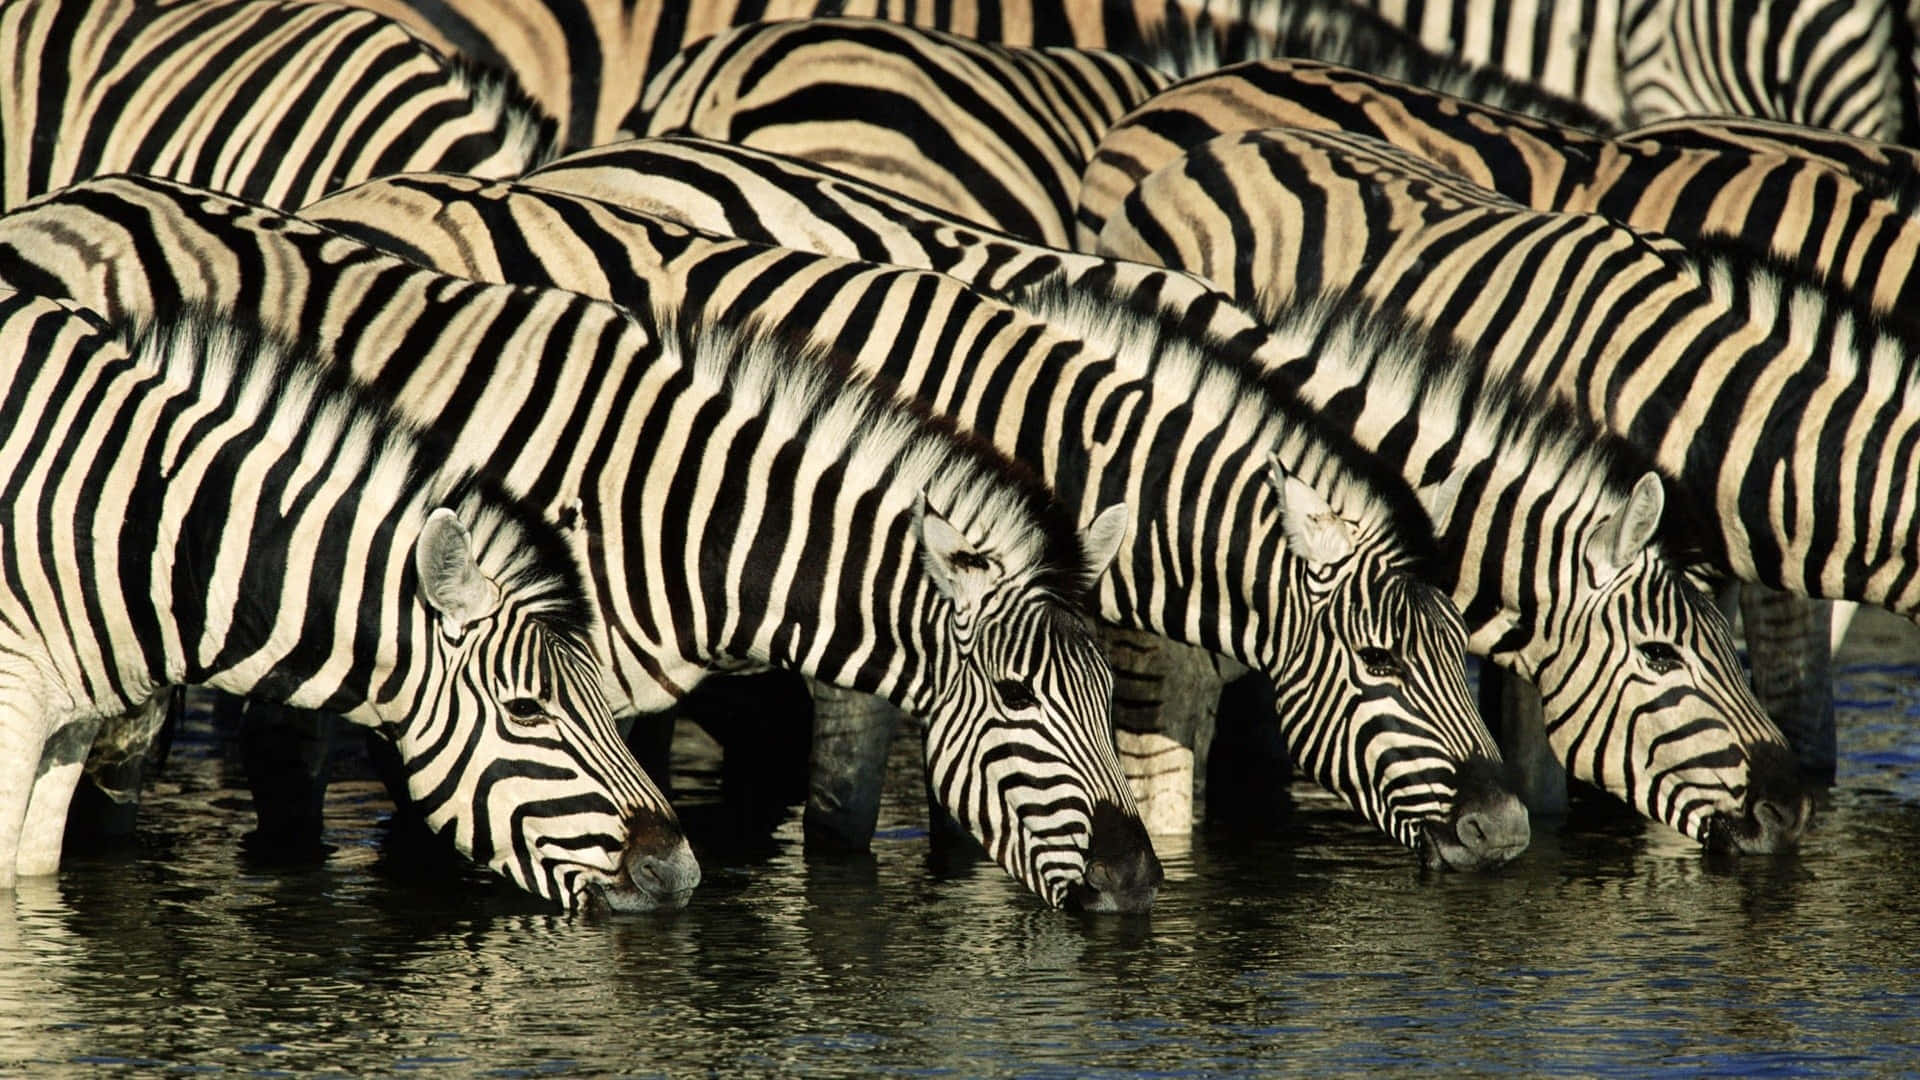 A magnificent zebra grazing in its natural environment.